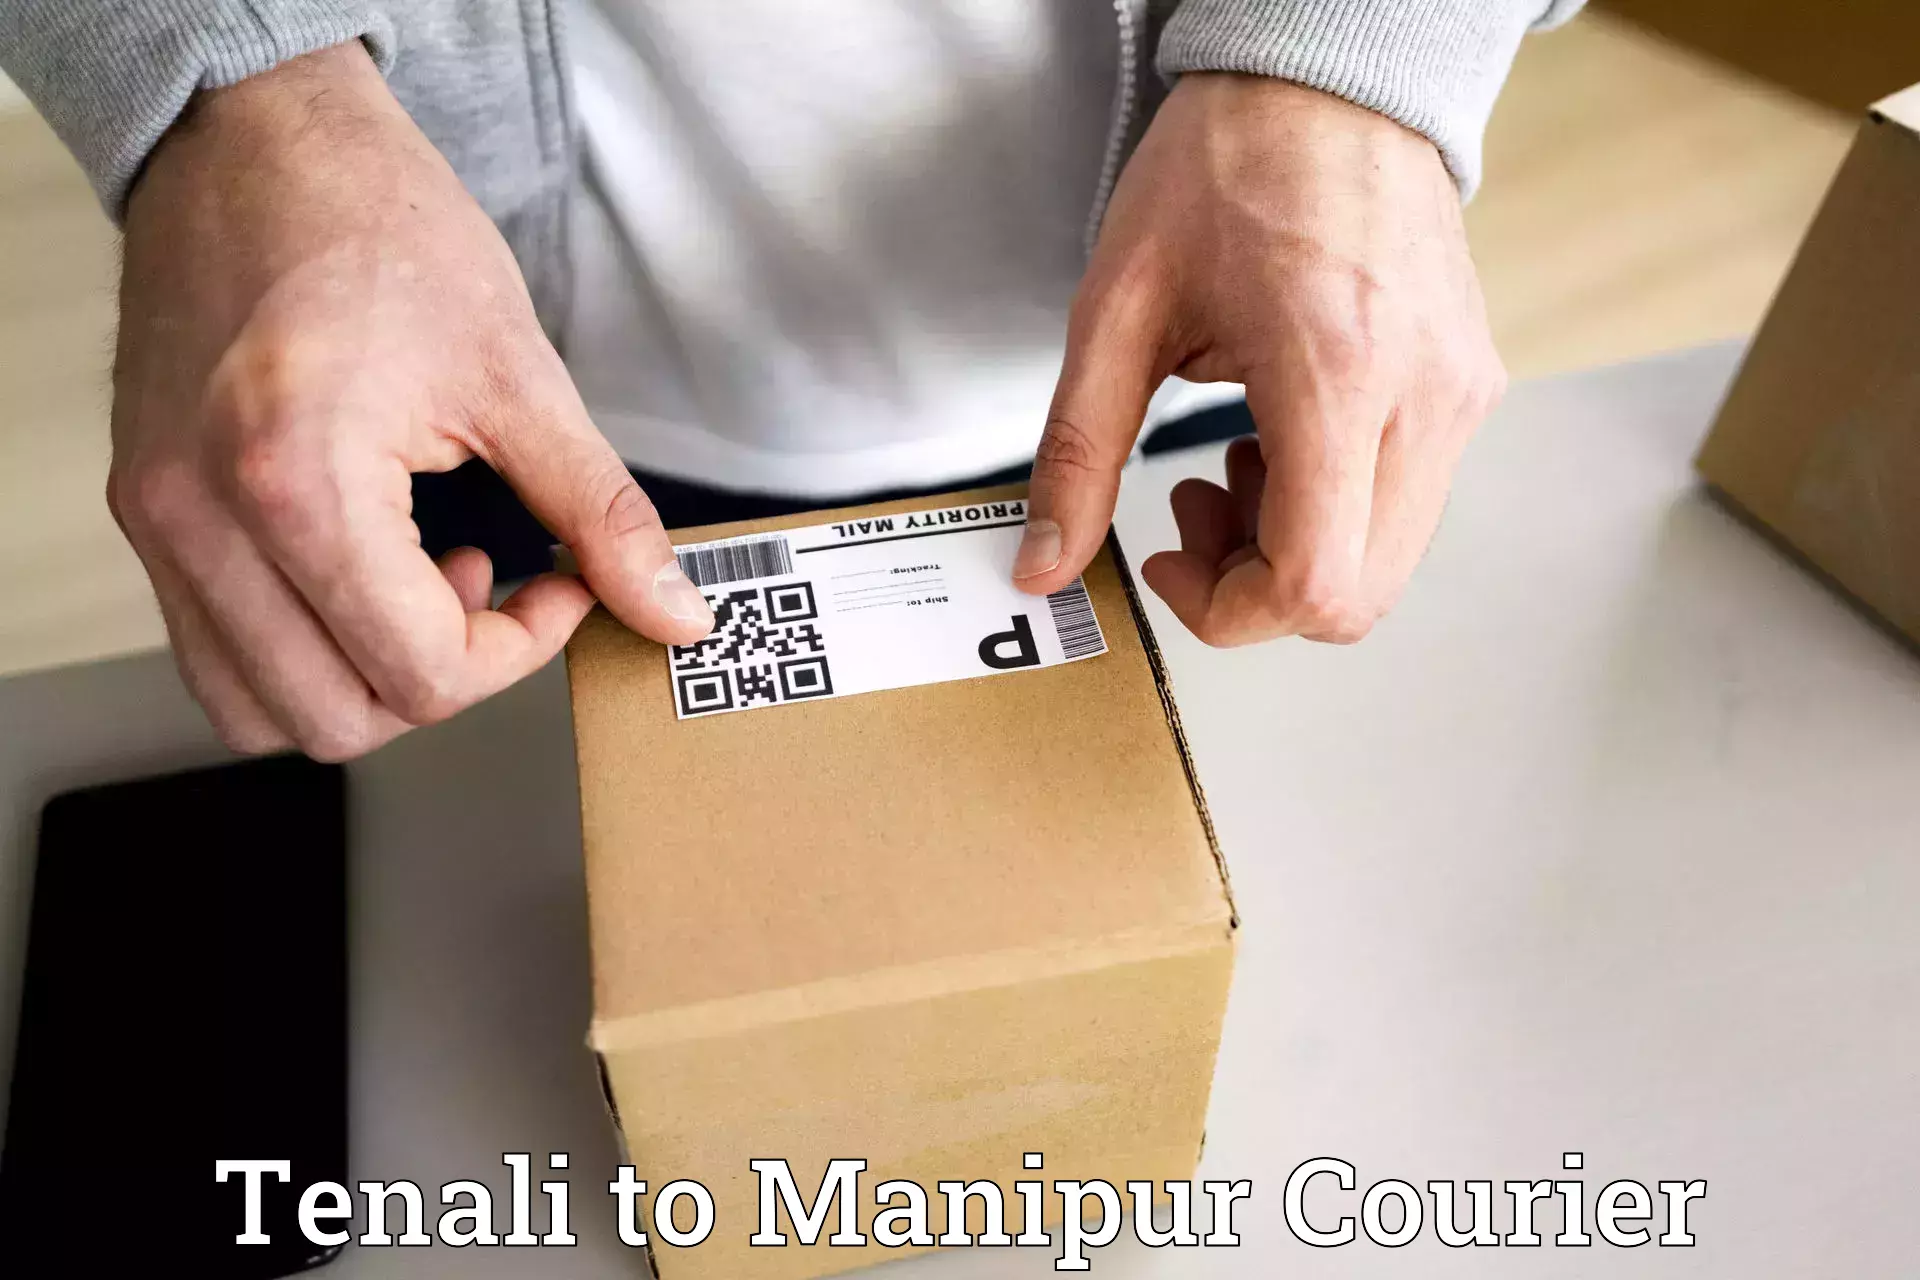 Package delivery network Tenali to Manipur